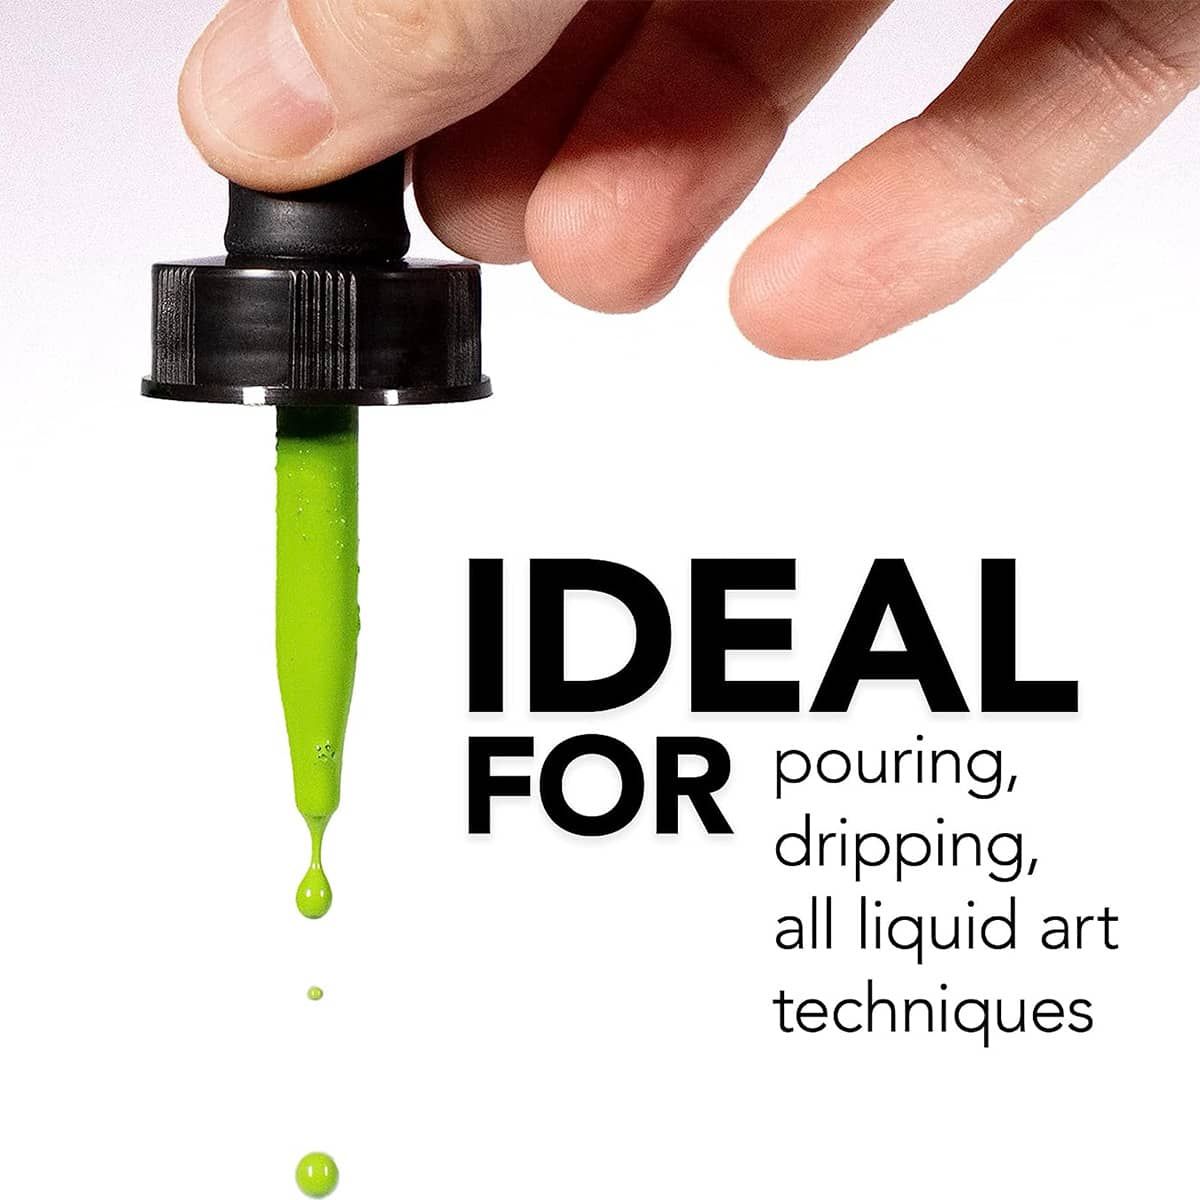 Ideal for pouring, dripping, all liquid art techniques